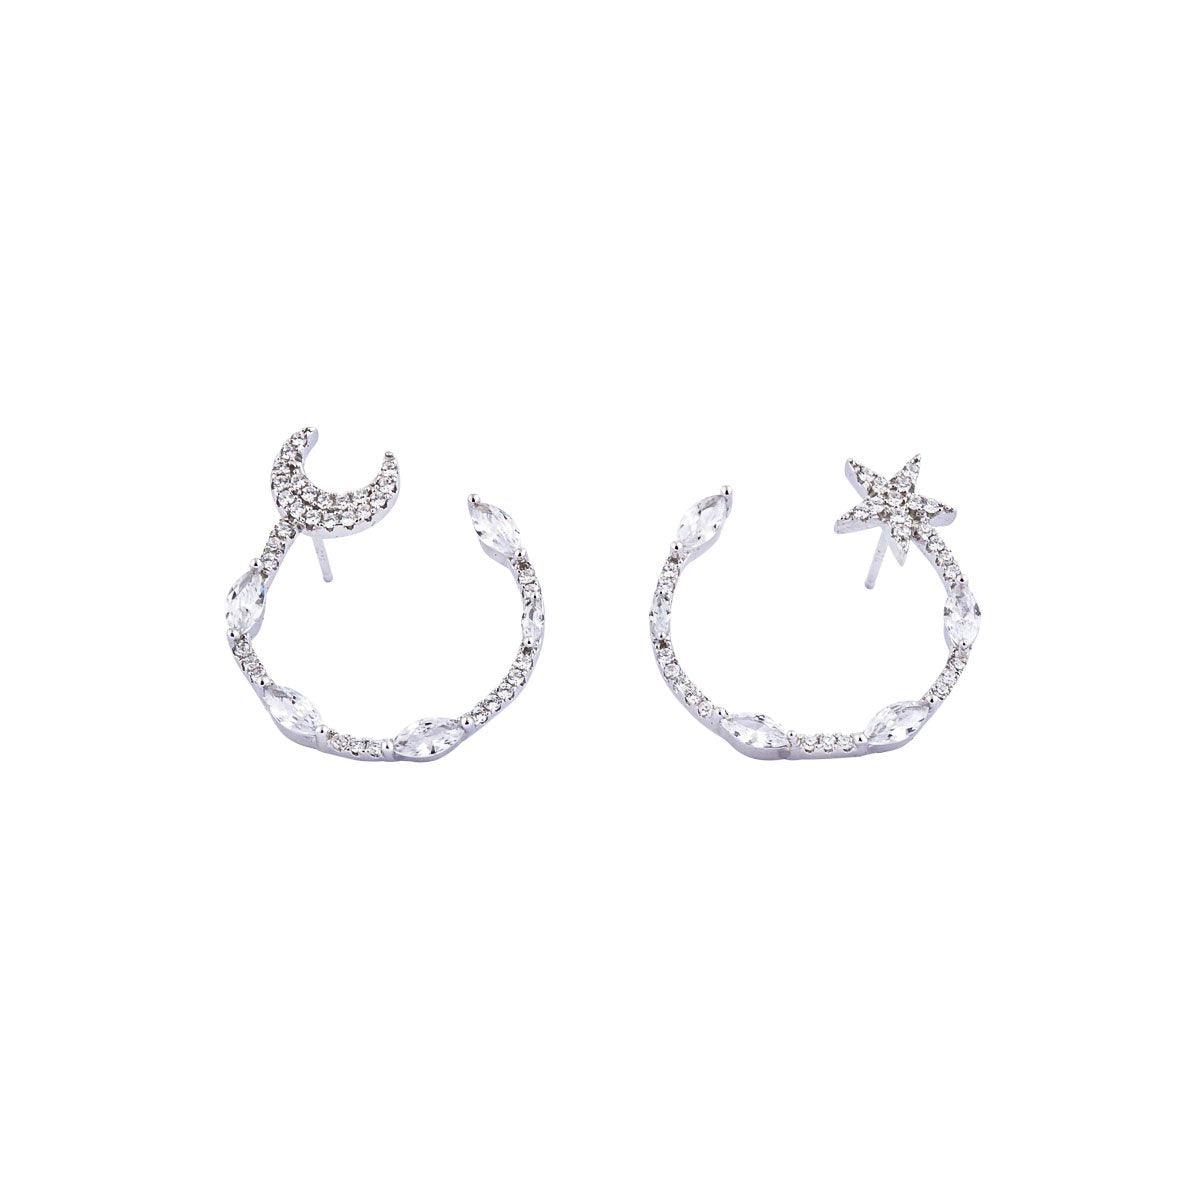 Earring E1419 - 925 Sterling Silver - Asfour Crystal